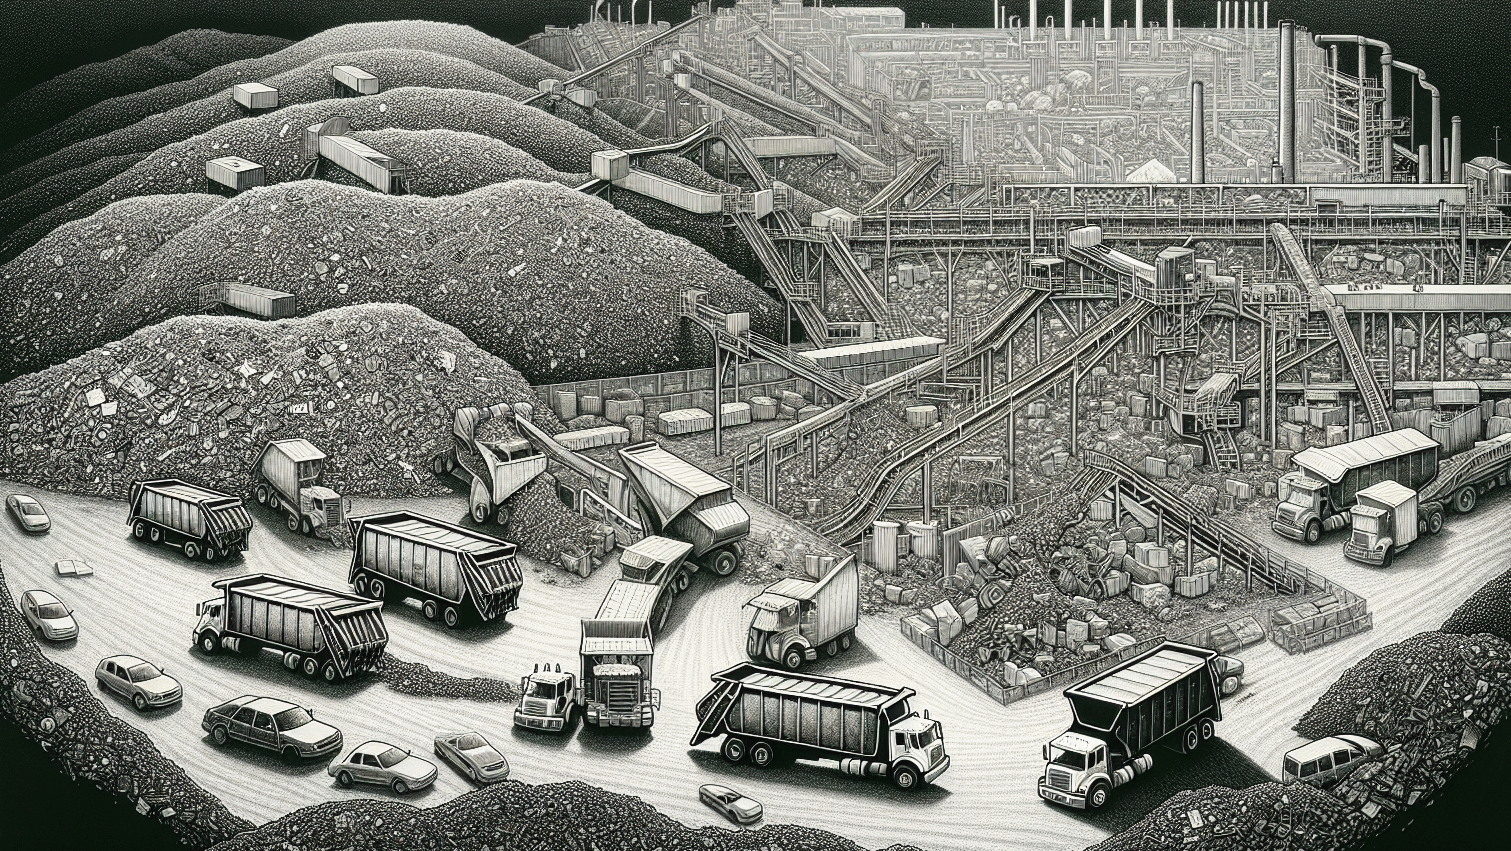 Illustration of a landfill site with waste disposal trucks and recycling facilities